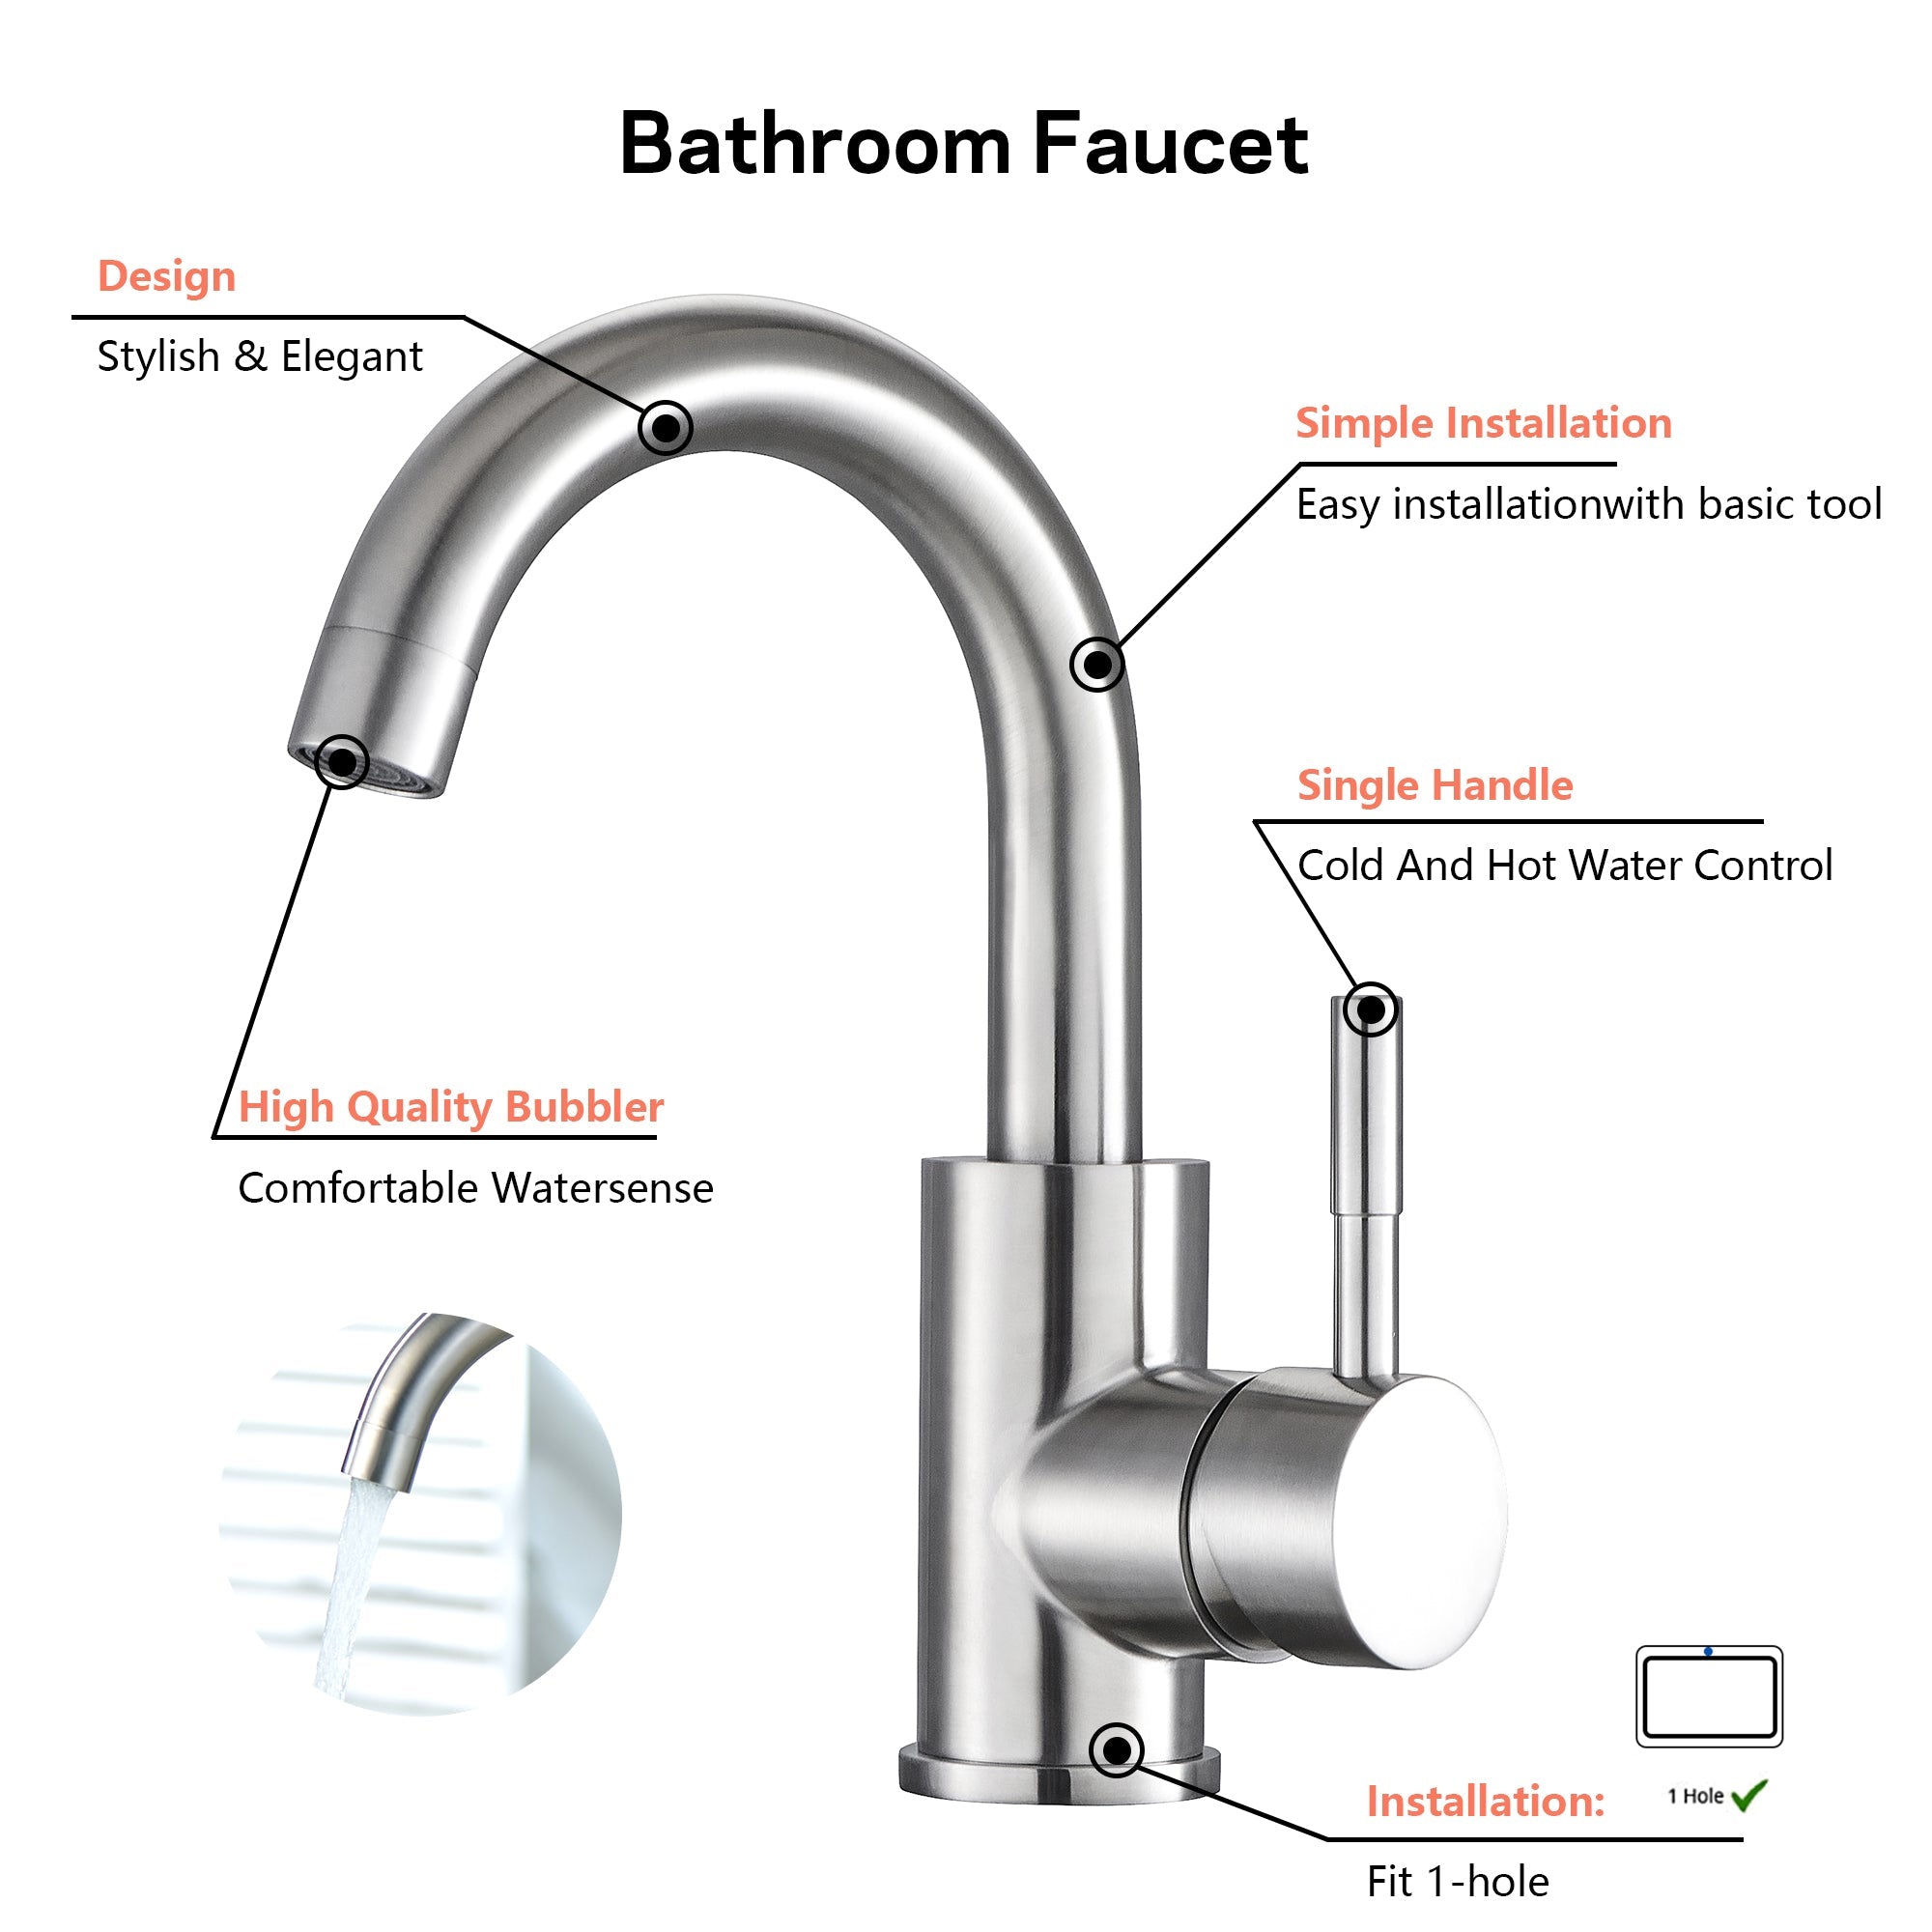 Lordear Bathroom Faucet - 2 Handle Brushed Nickel Lavatory Faucet Set with Pop-up Drain and Water Hoses | Bathroom Faucet, Big Deal | Lordear